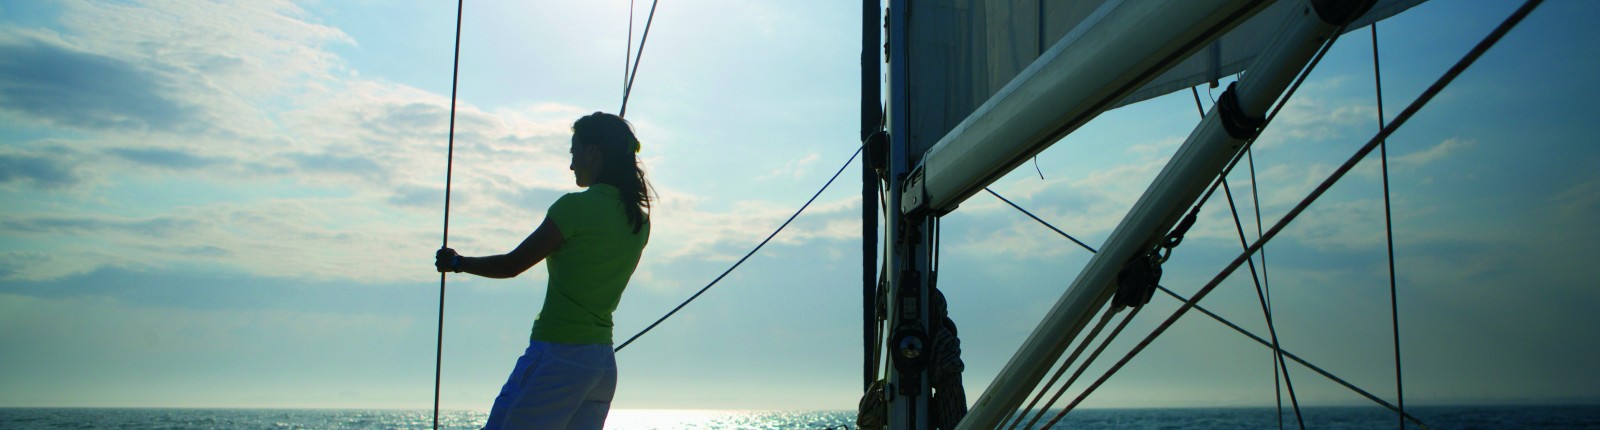 Woman standing on sailing boat